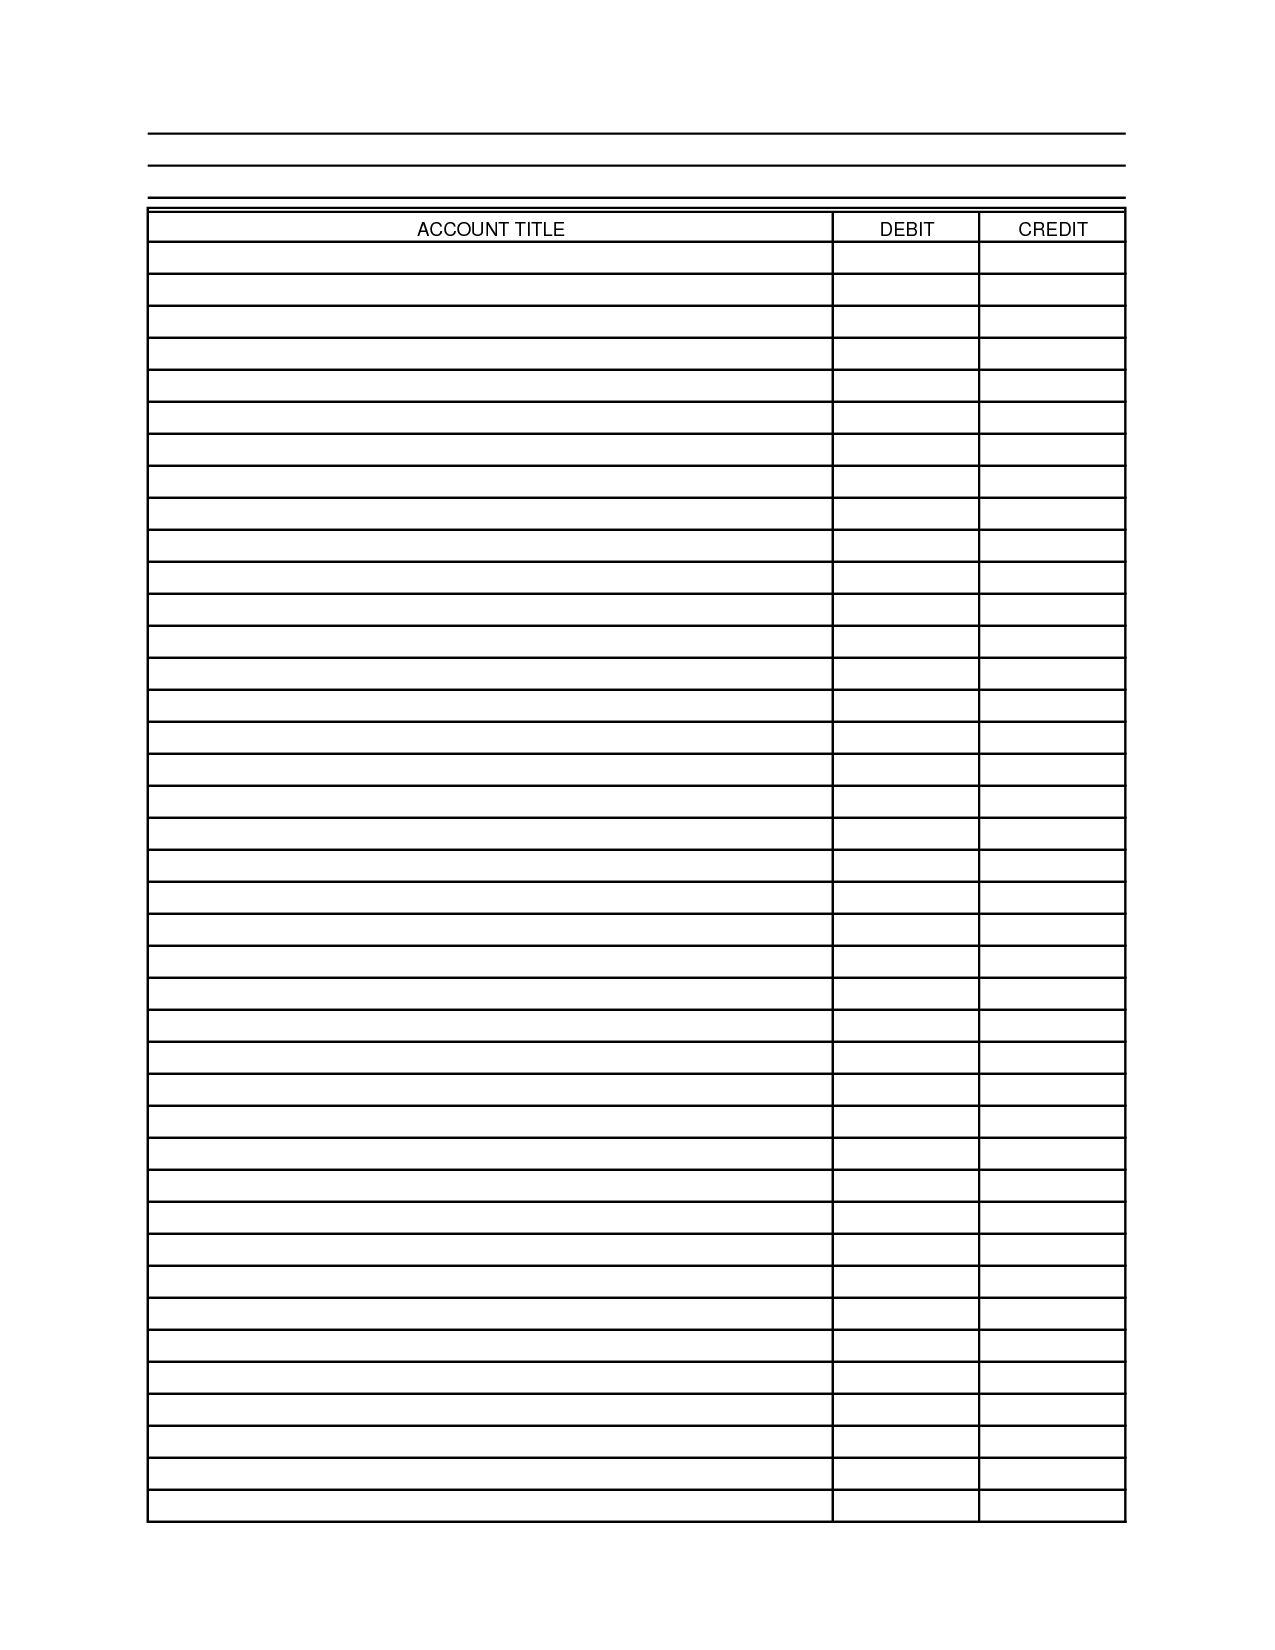 Accounting Trial Balance Template | Accounting | Trial Balance ... Within Blank Trial Balance Sheet